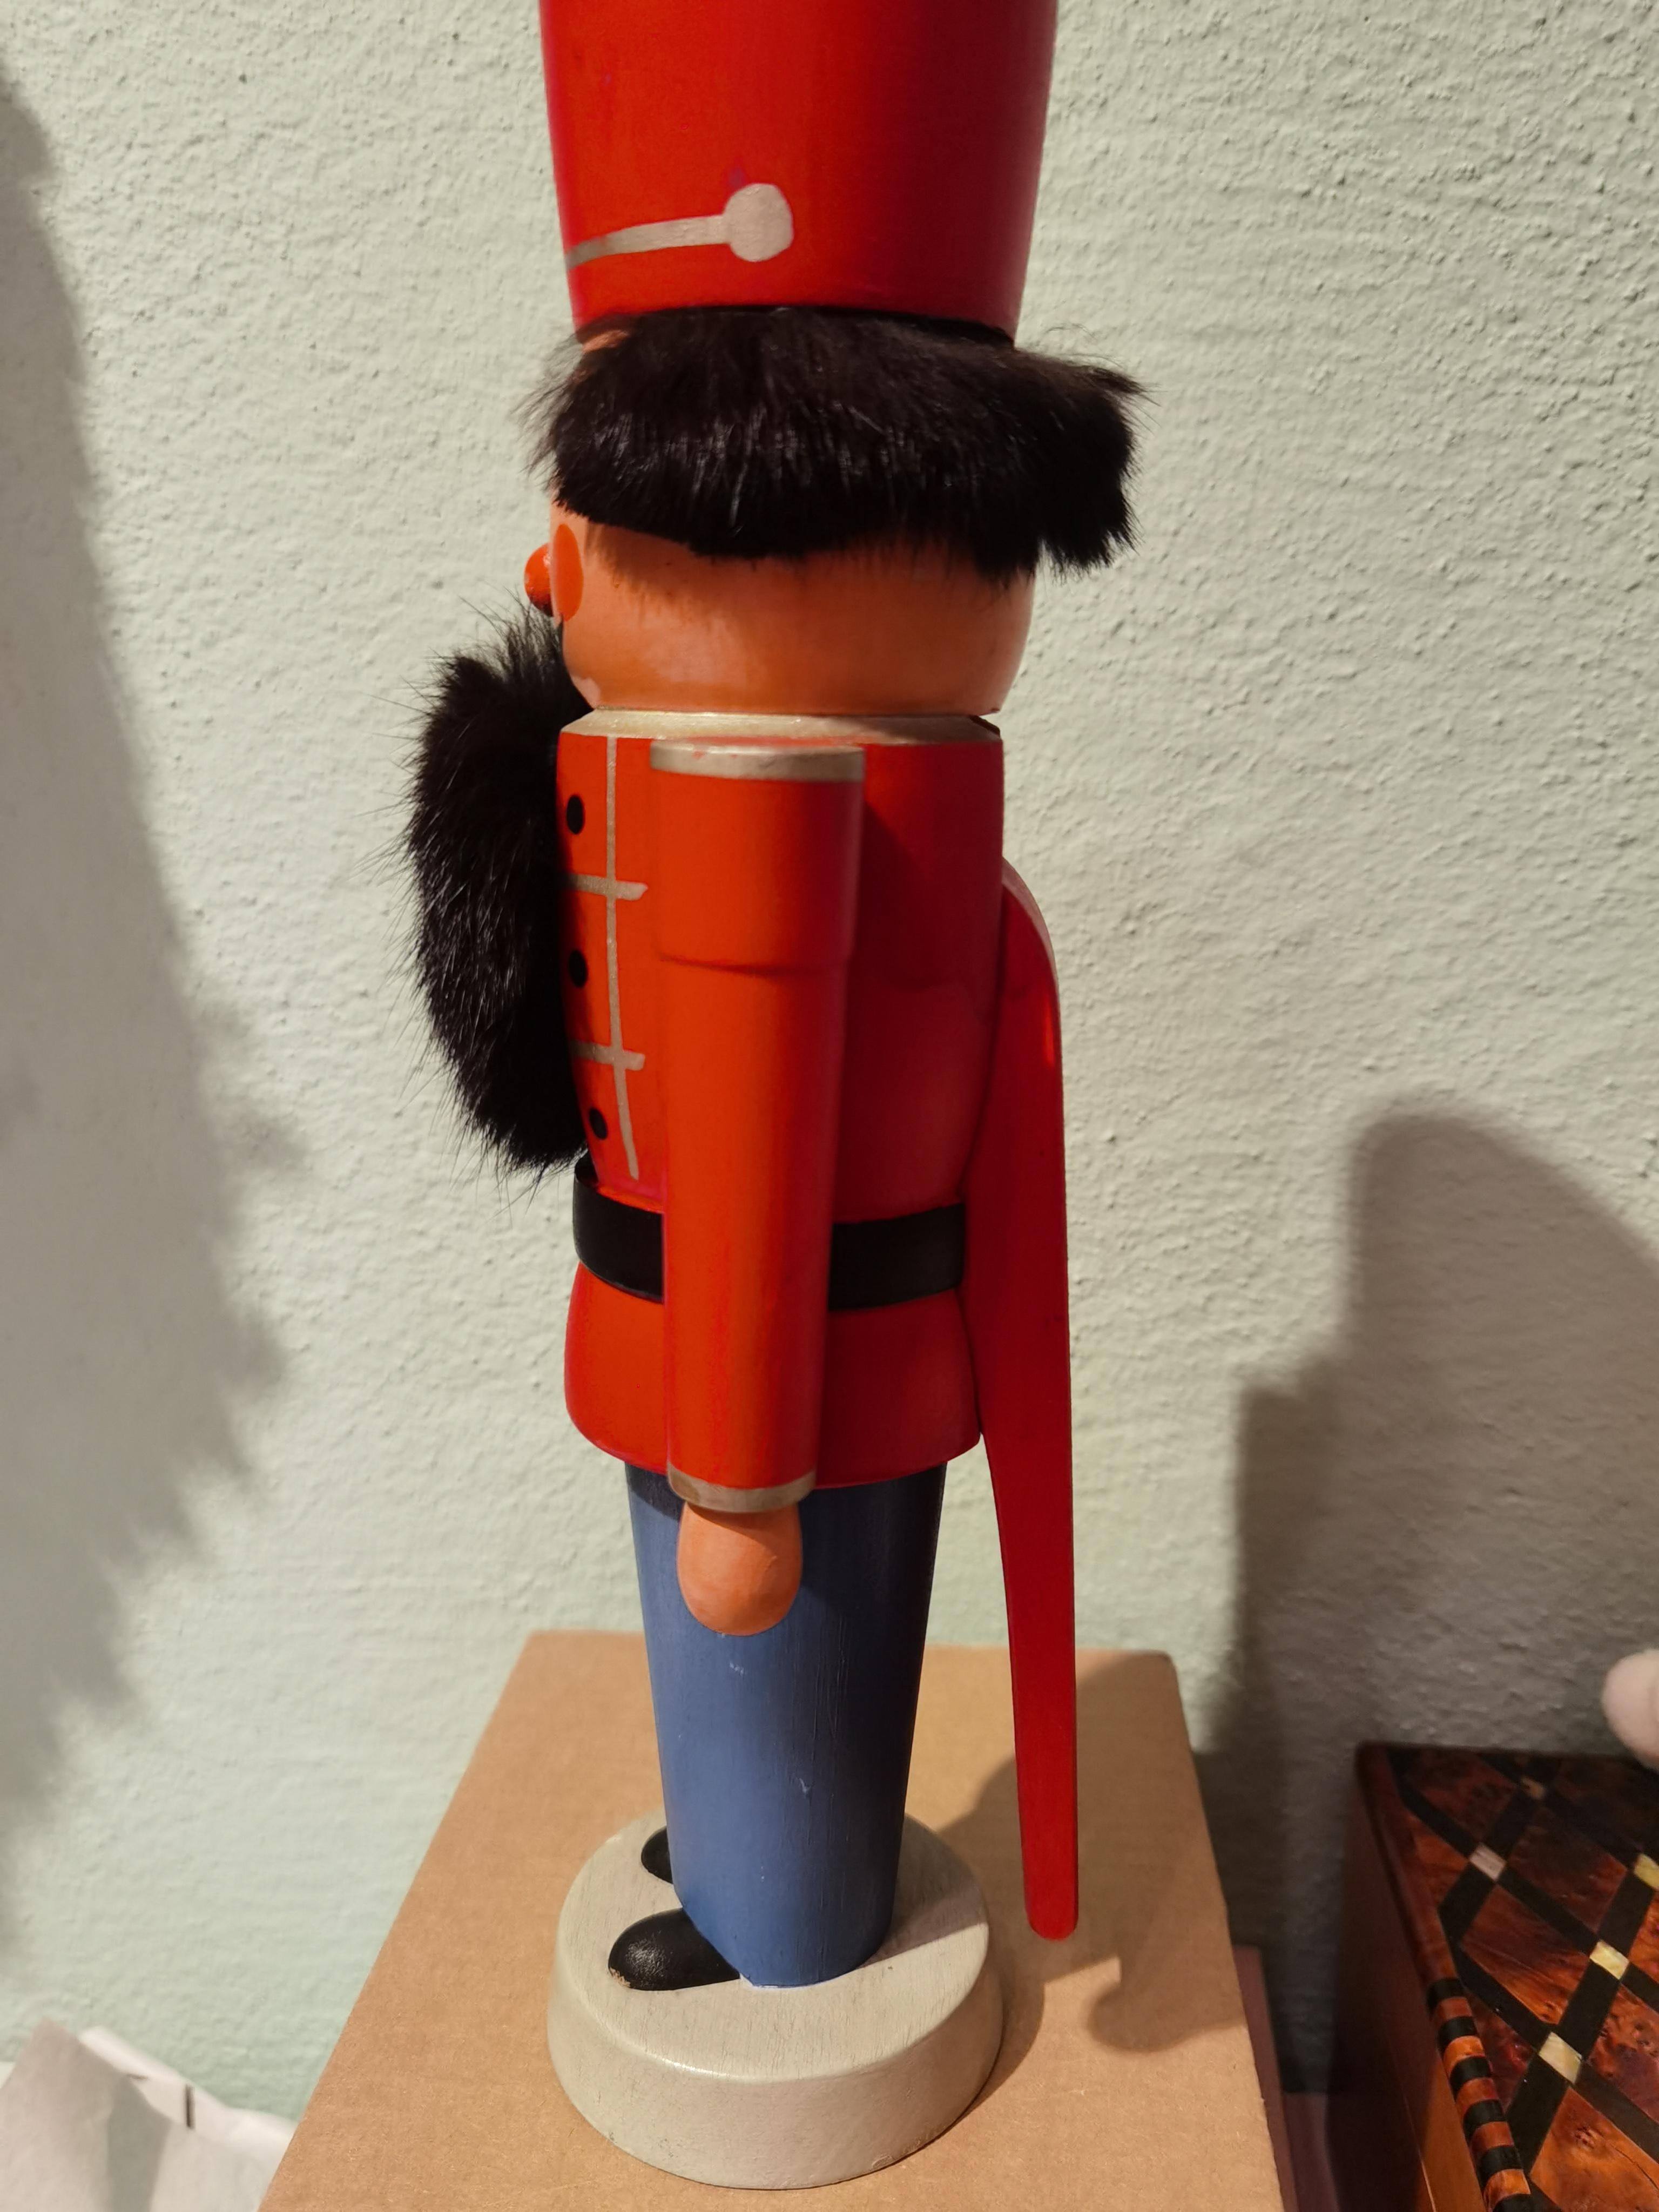 Vintage wooden nutcracker figure from the Erzgebirge. The region Erzgebirge formerly Eastern Germany is famous for this special kind of nutcrackers, where intricate carving has been their home. Completely hand-painted in red and blue colors and